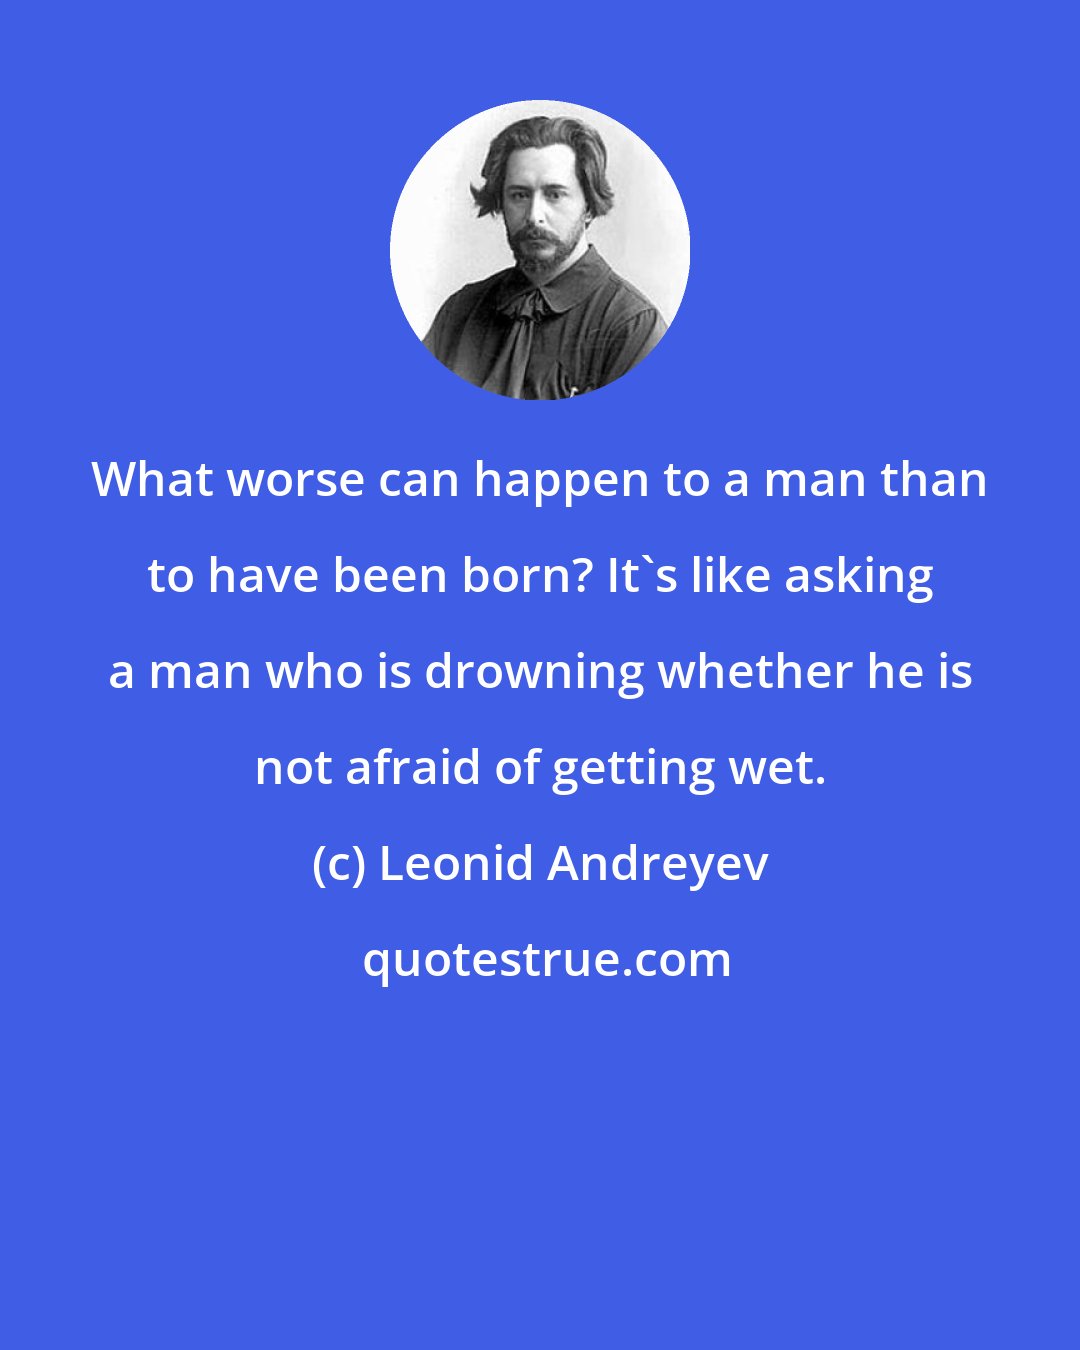 Leonid Andreyev: What worse can happen to a man than to have been born? It's like asking a man who is drowning whether he is not afraid of getting wet.